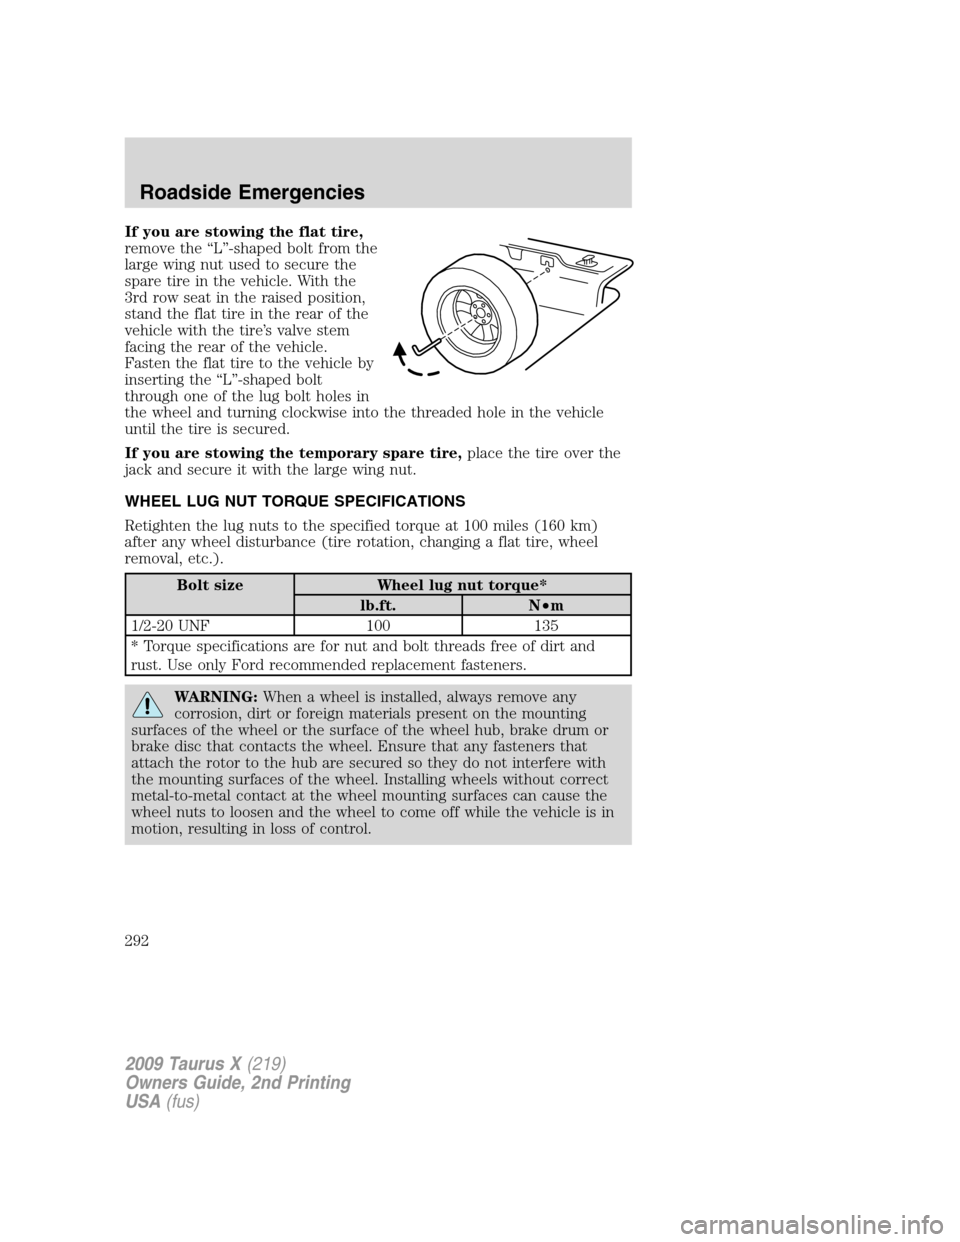 FORD TAURUS X 2009 1.G User Guide If you are stowing the flat tire,
remove the “L”-shaped bolt from the
large wing nut used to secure the
spare tire in the vehicle. With the
3rd row seat in the raised position,
stand the flat tire